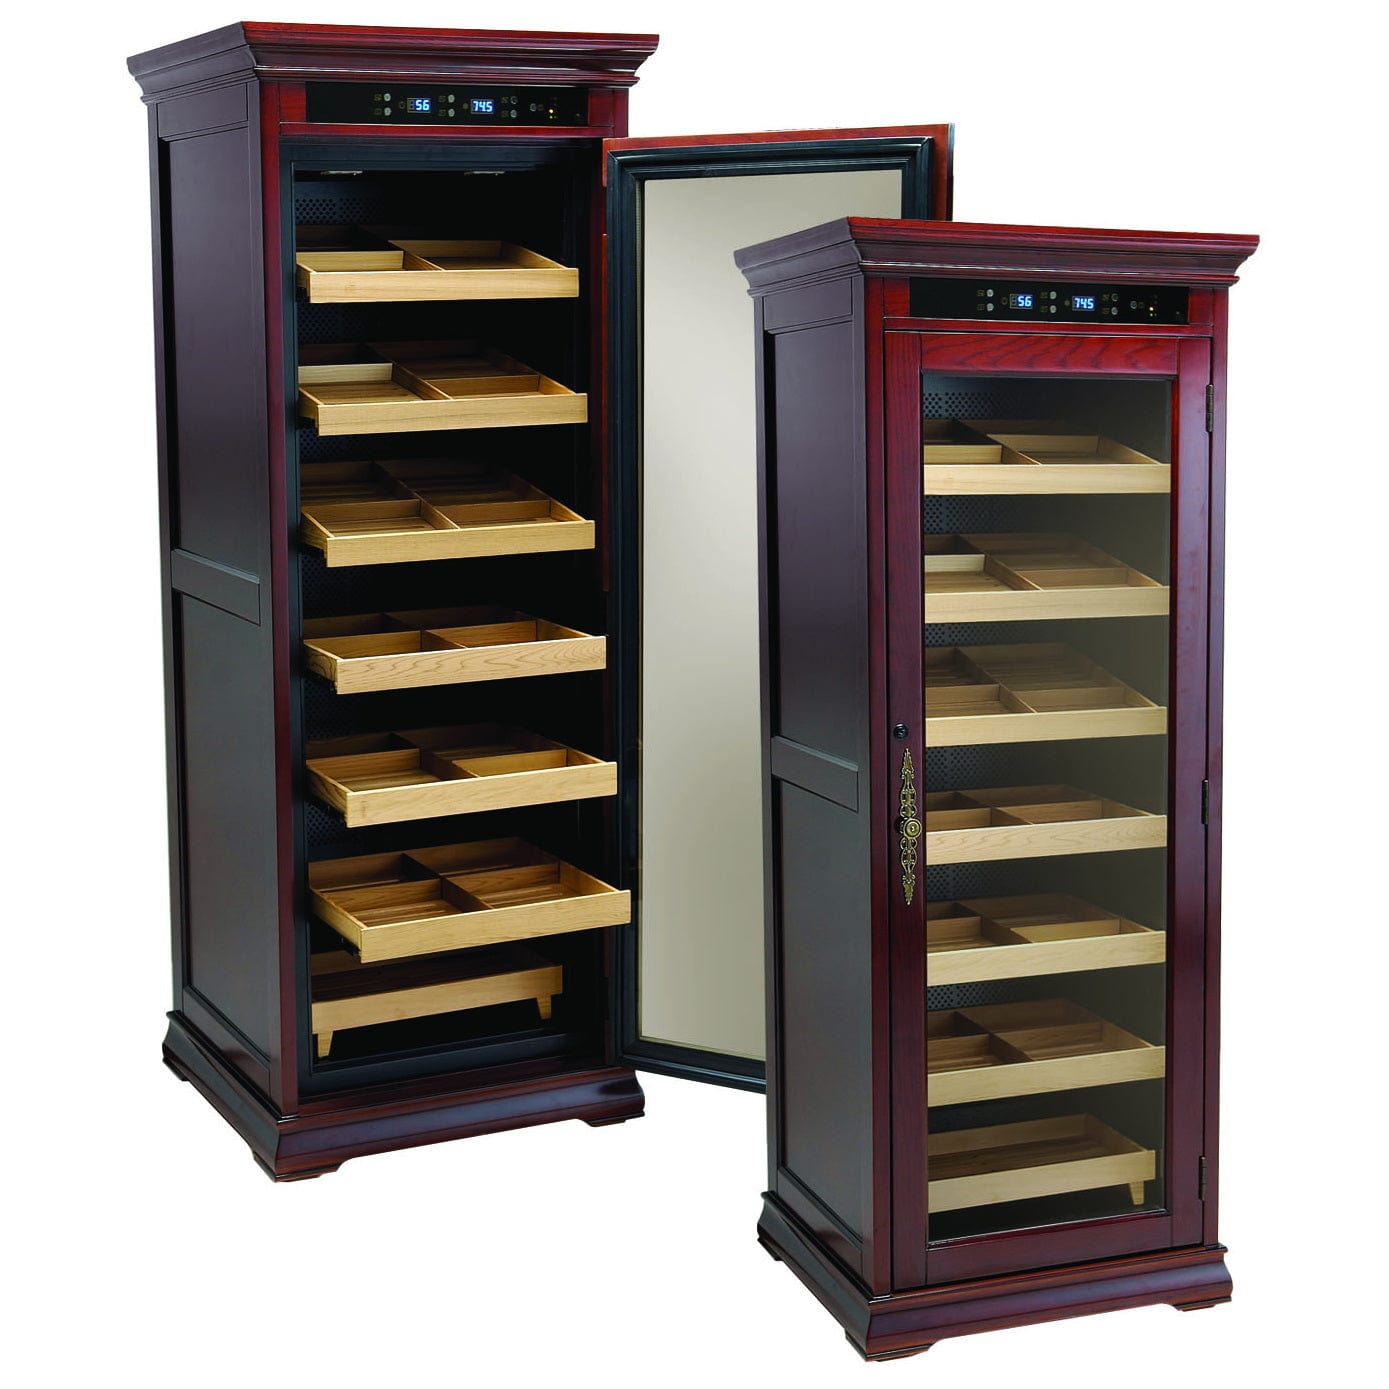 The Remington Electric Cabinet Cigar Humidor Humidor Wine Coolers Empire